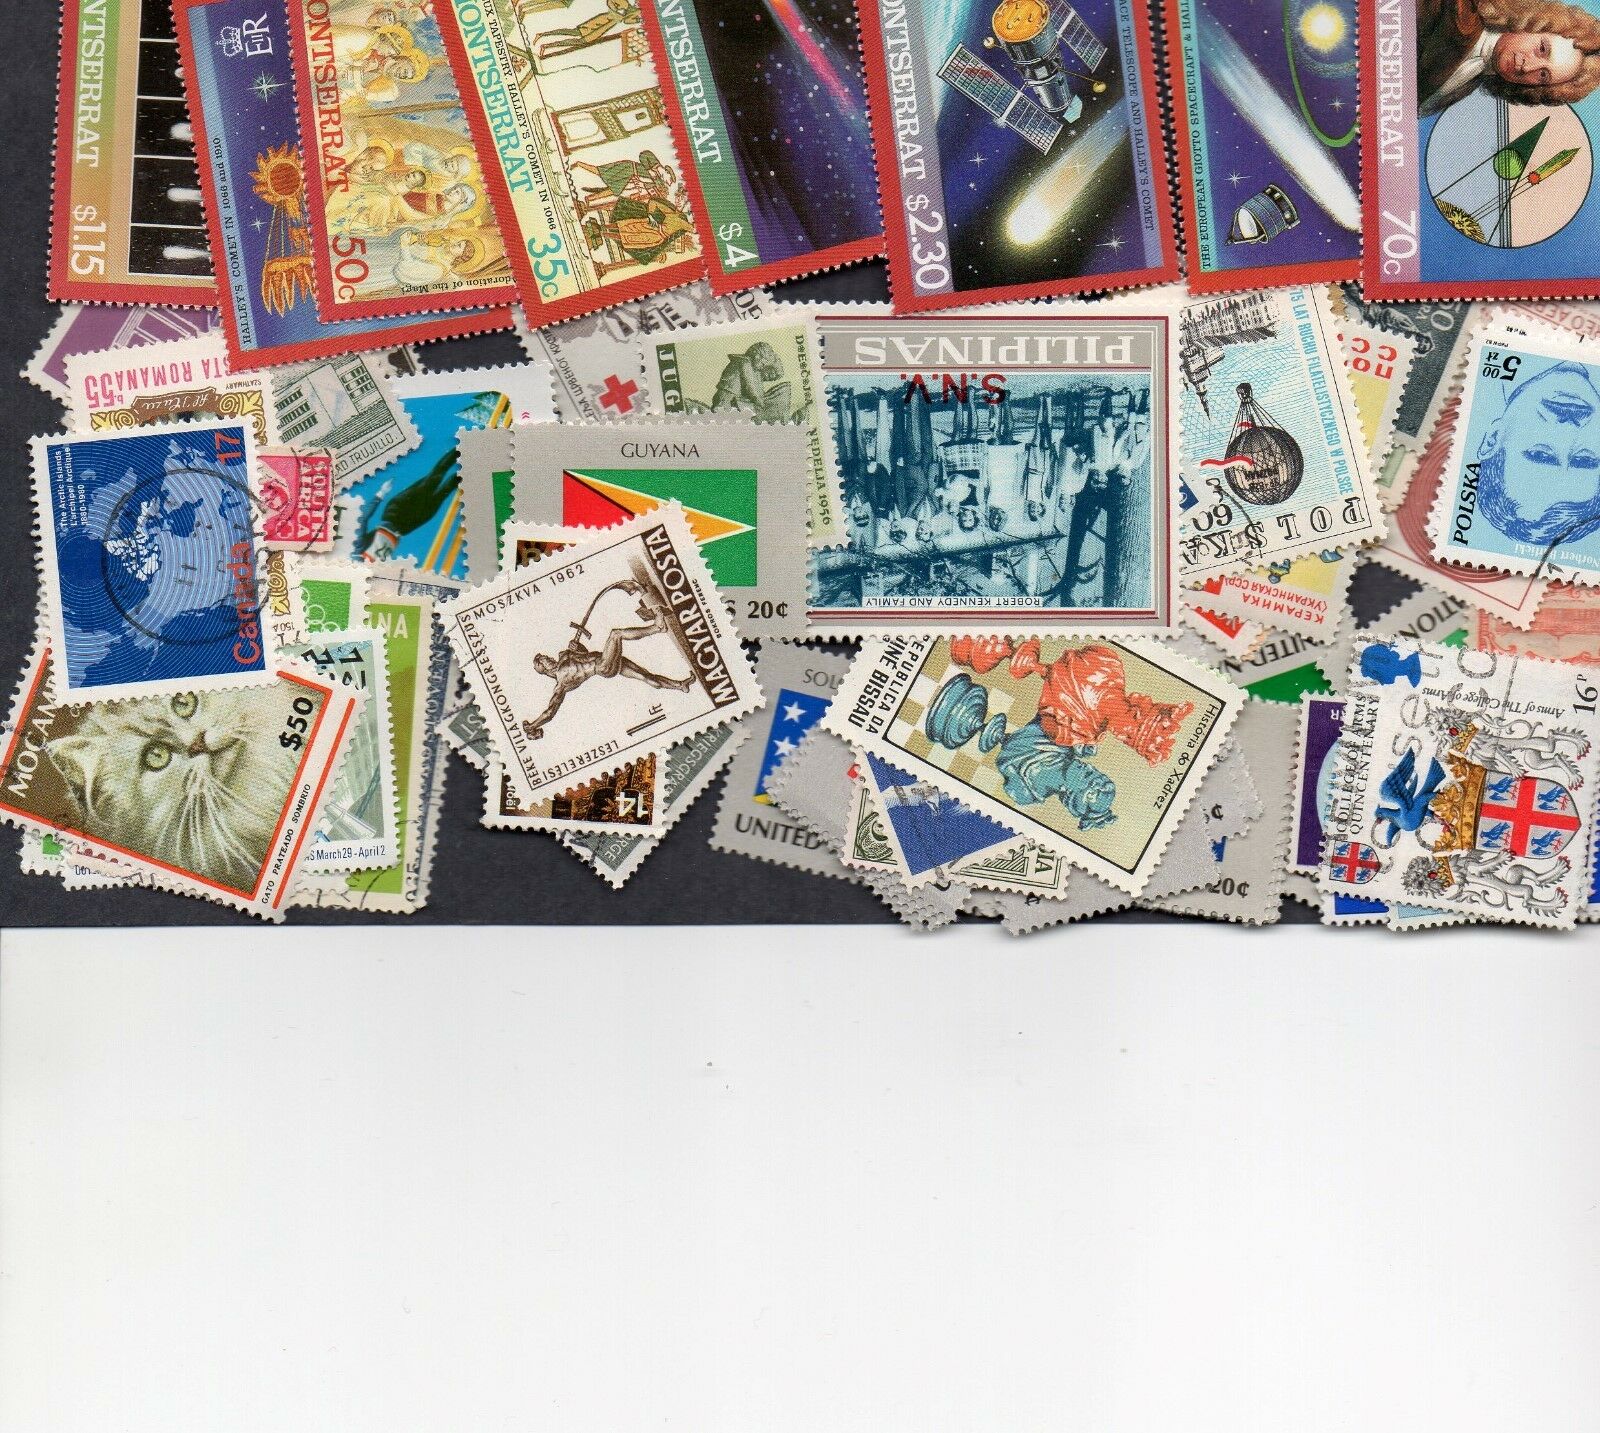 100 Different Nice Worldwide Stamps With No Common For $1.00 (limit Of One)